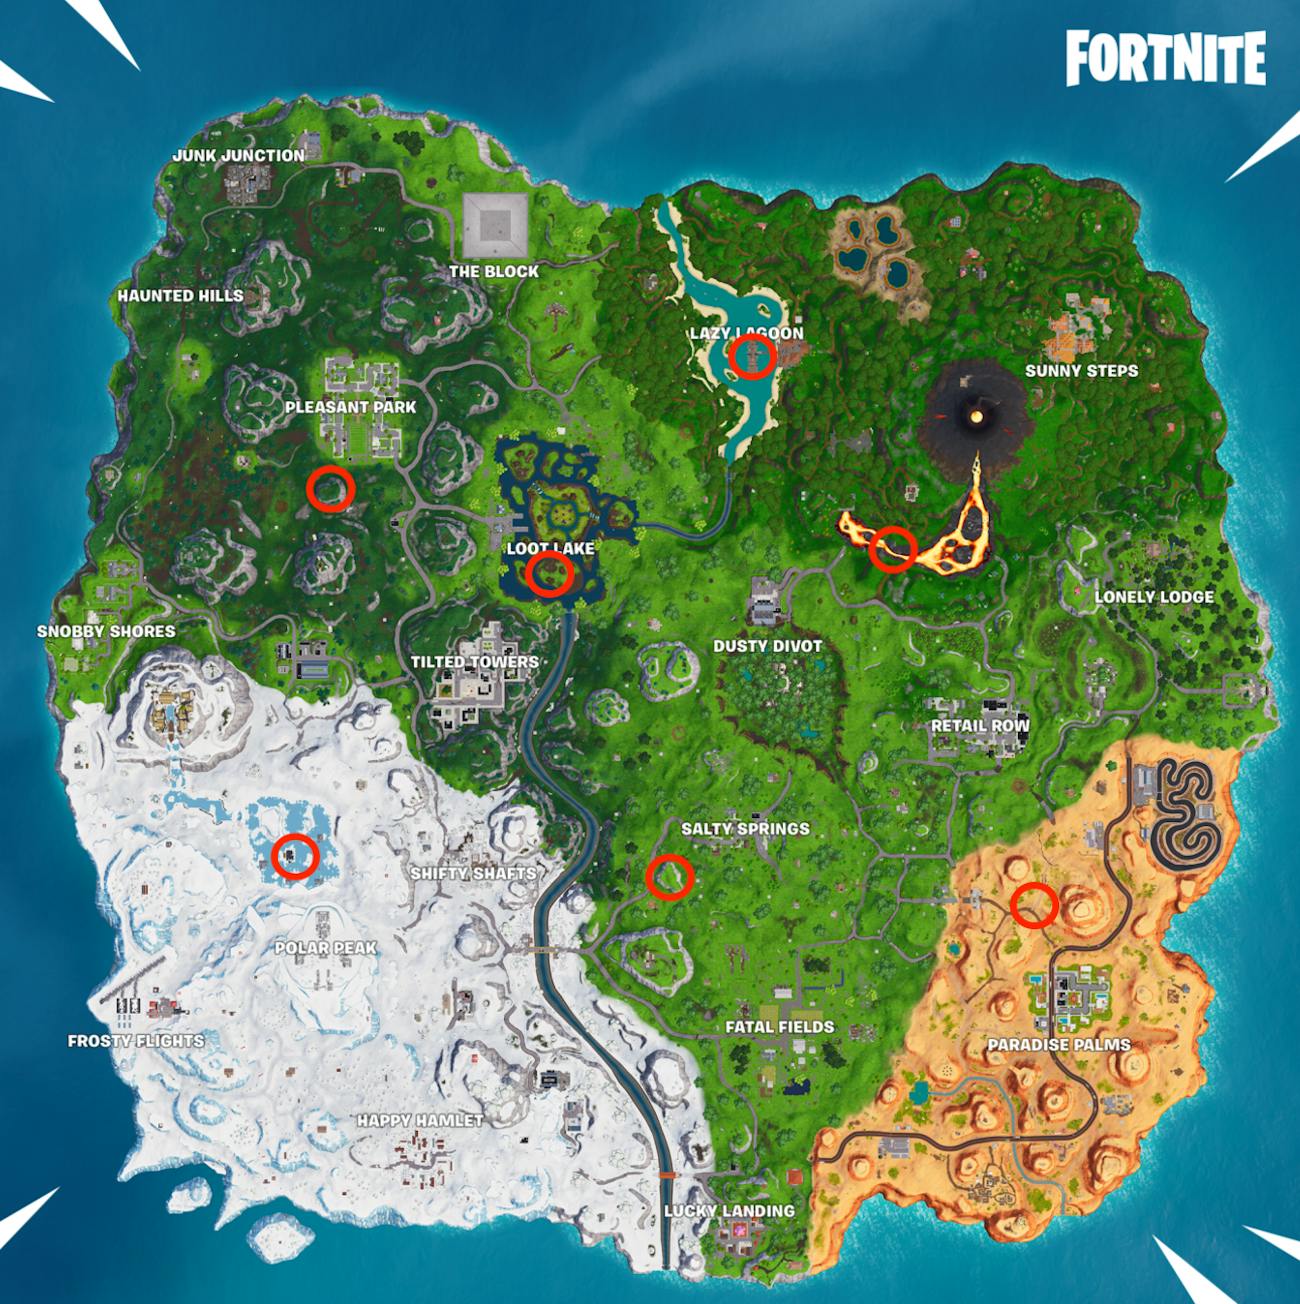 Fortnite Flaming Hoop Locations Map Where To Launch Through With - fortnite season 8 week 10 flaming hoop